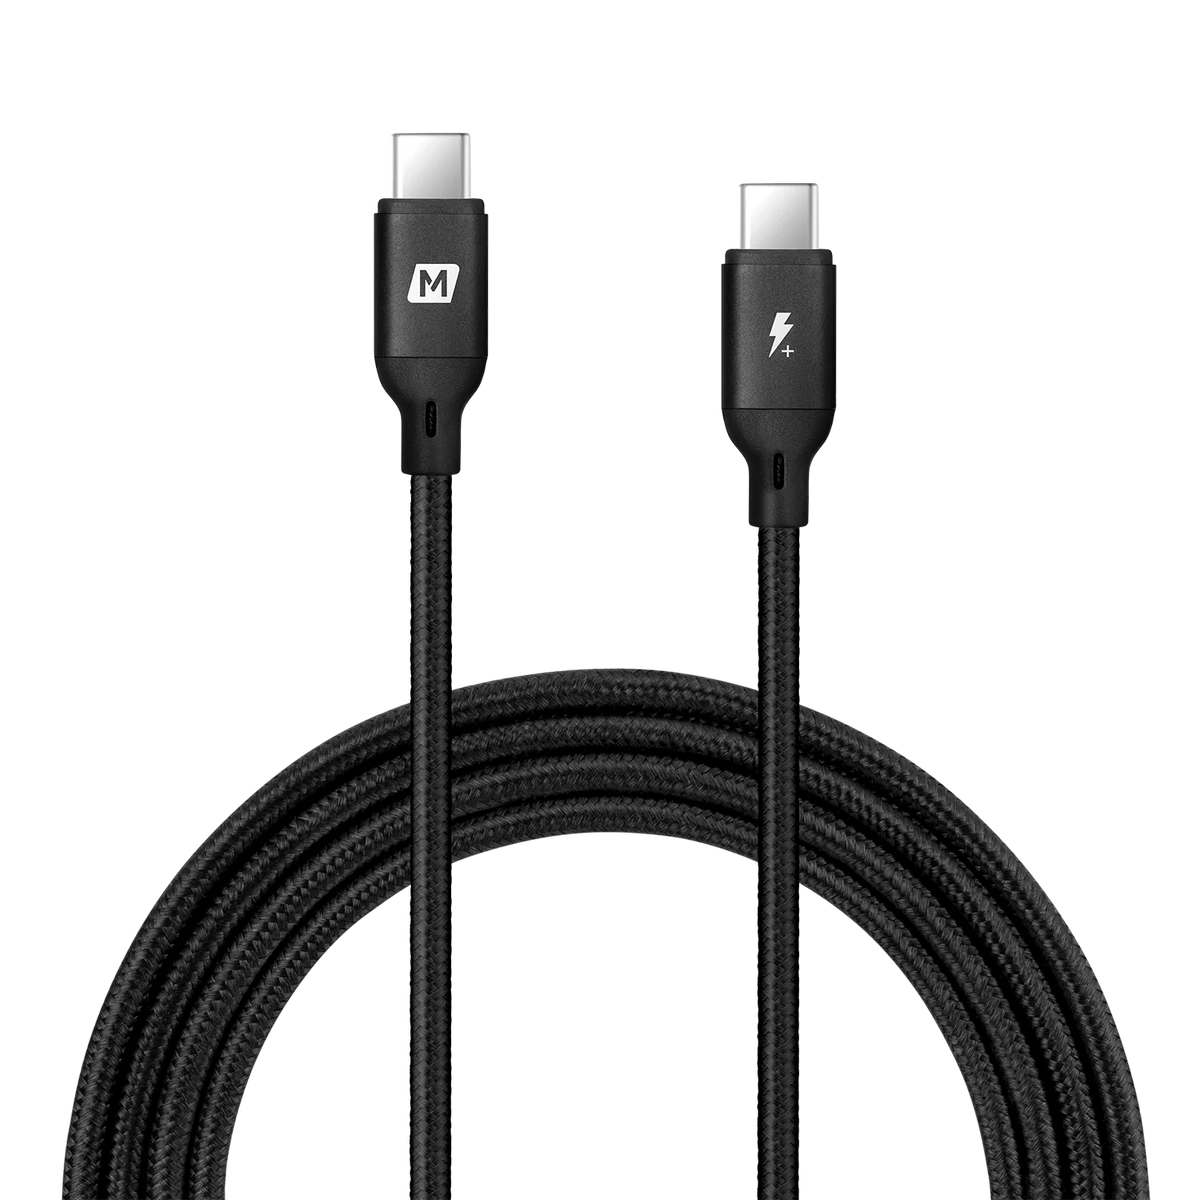 Go Link USB C to USB C Charging Cable 100W PD Woven Pattern (2m) DC20D